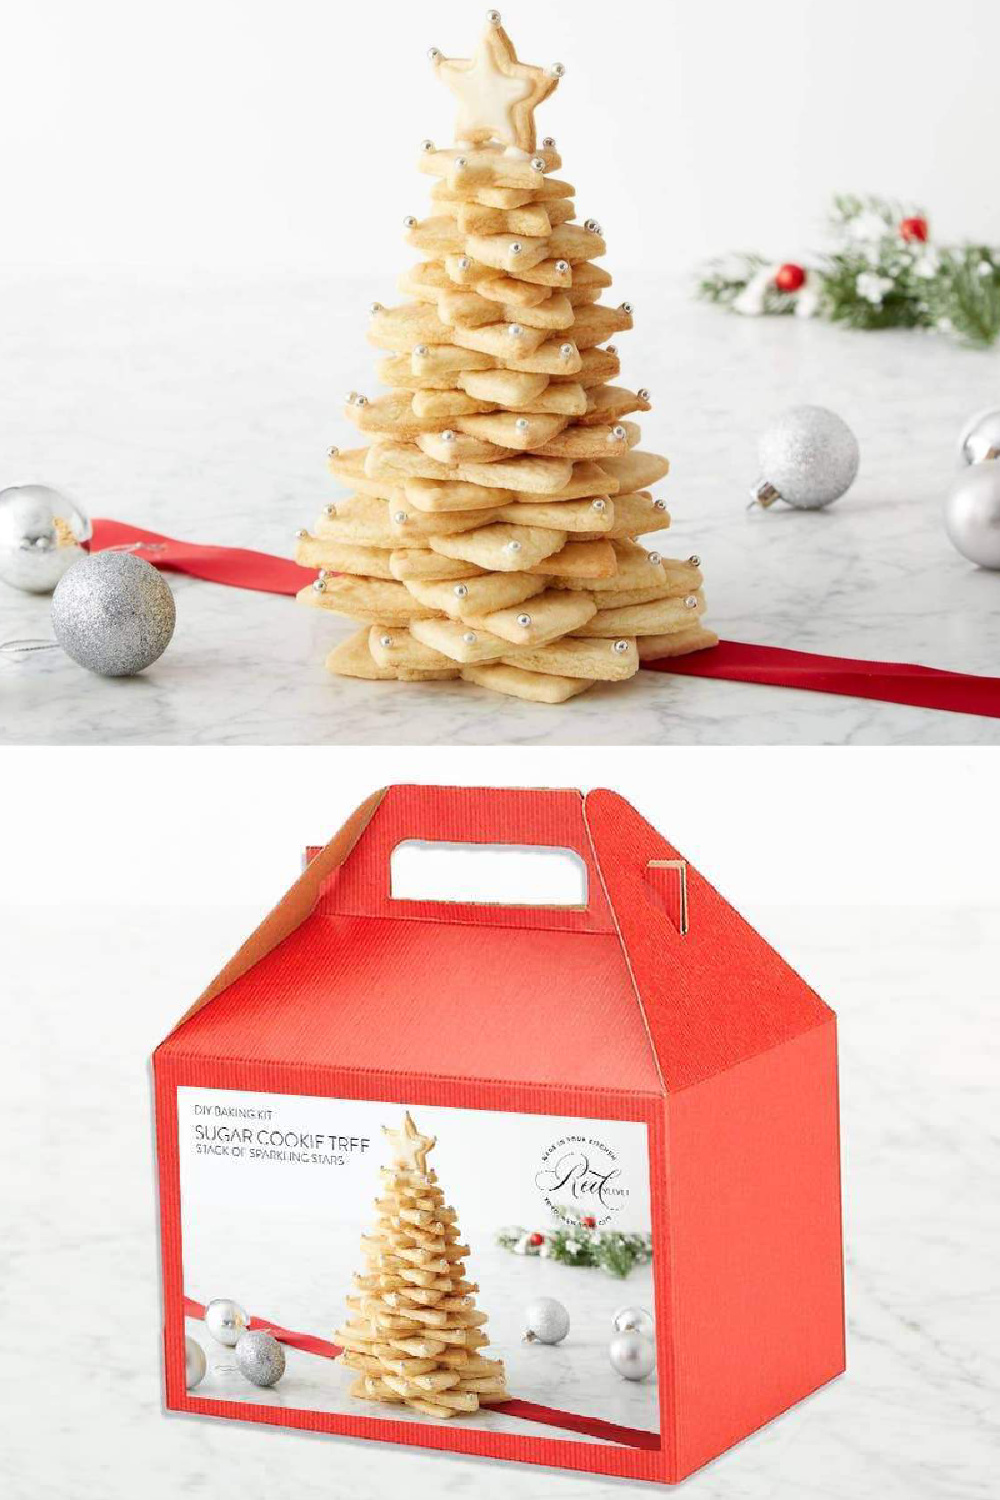 10 best holiday gifts for little kids 3-7 : Sugar cookie tree making kit | Small Business Holiday Gift Guide 2020